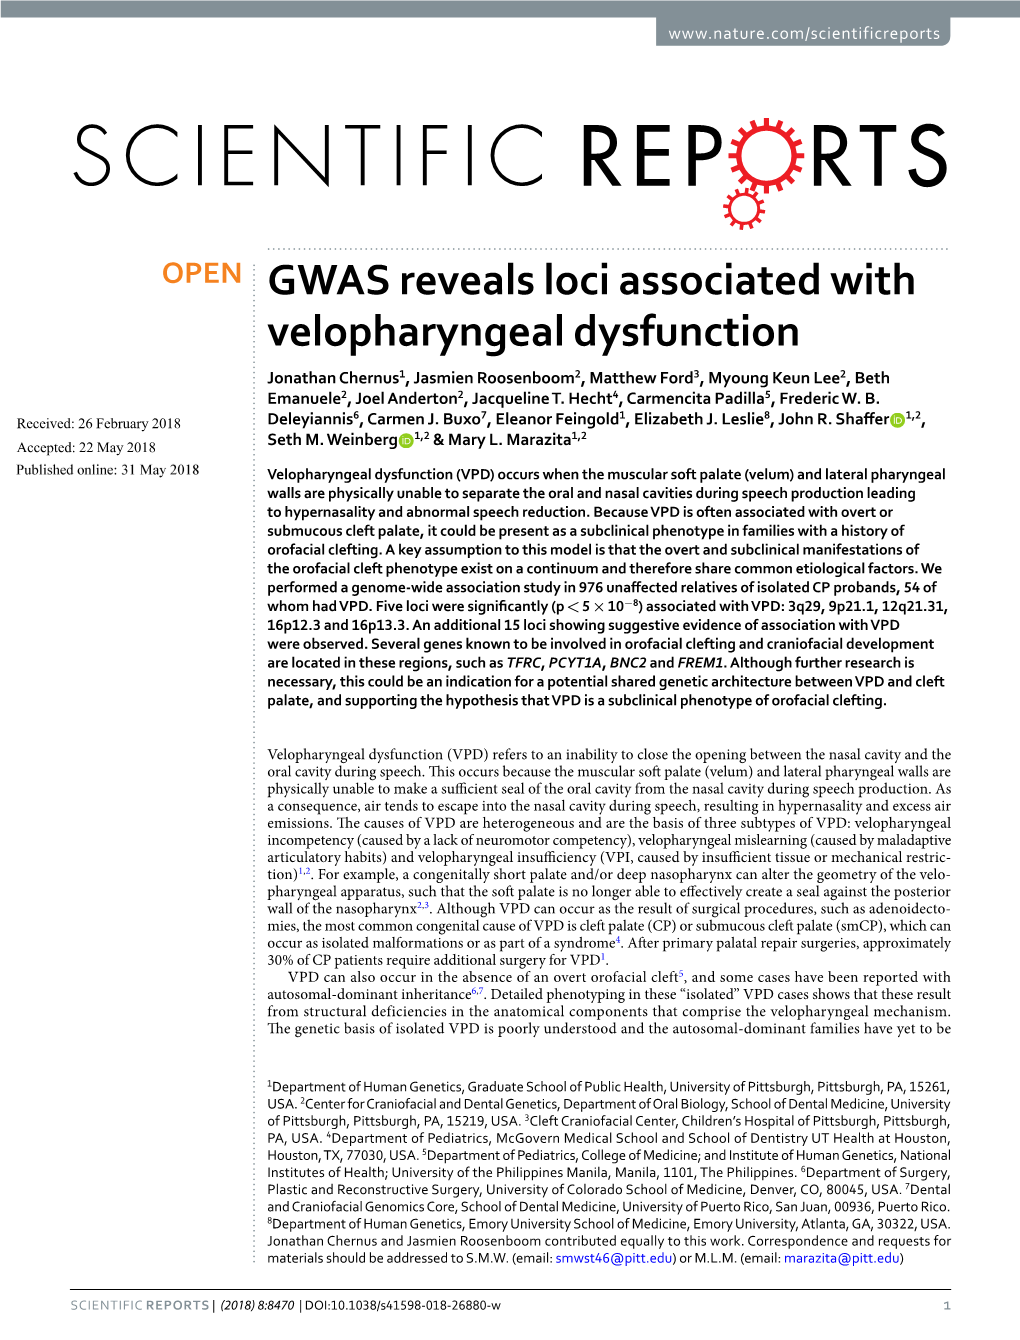 GWAS Reveals Loci Associated with Velopharyngeal Dysfunction